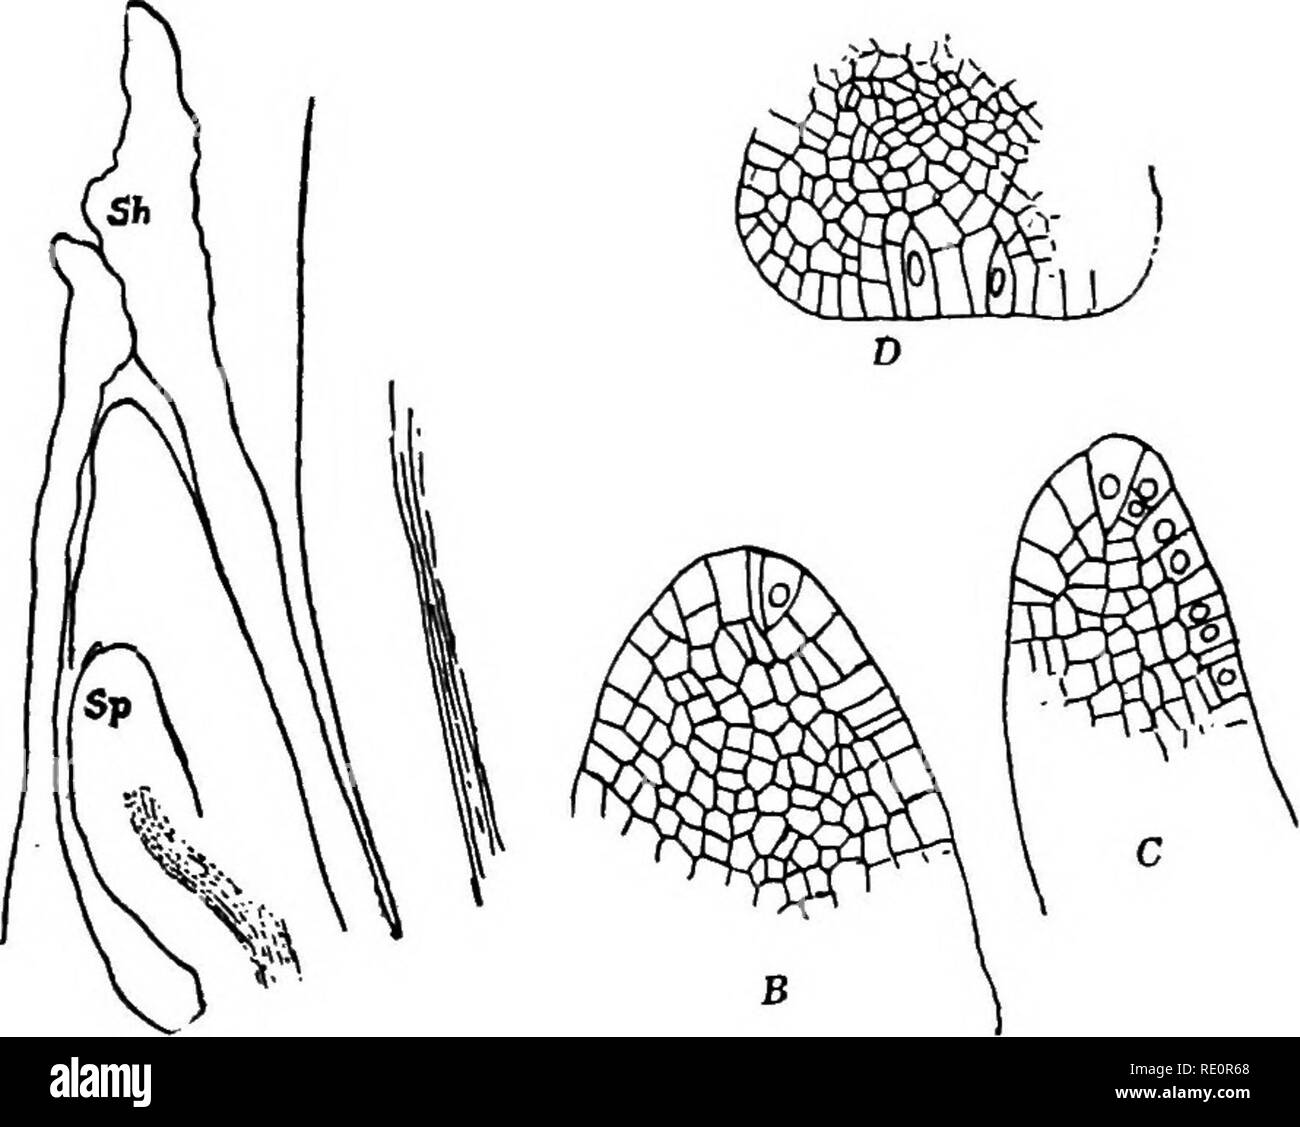 . The Eusporangiatae; the comparative morphology of the Ophioglossaceae and Marattiaceae. Ophioglossaceae; Marattiaceae. no THE OPHIOGLOSSALES Sterile lamina. In the larger species, like B. virgtntanum, many hundred sporangia may be developed upon a single sporangiophore. In these larger and more special- ized forms the sporangium is usually smaller and is better differentiated, always having a more or less distinct pedicel. The form of the sporangiophore in Helminthostach s is to some extent inter- mediate between that of Ophioglossum and Botrychium, but on the whole comes nearer to Botrychi Stock Photo